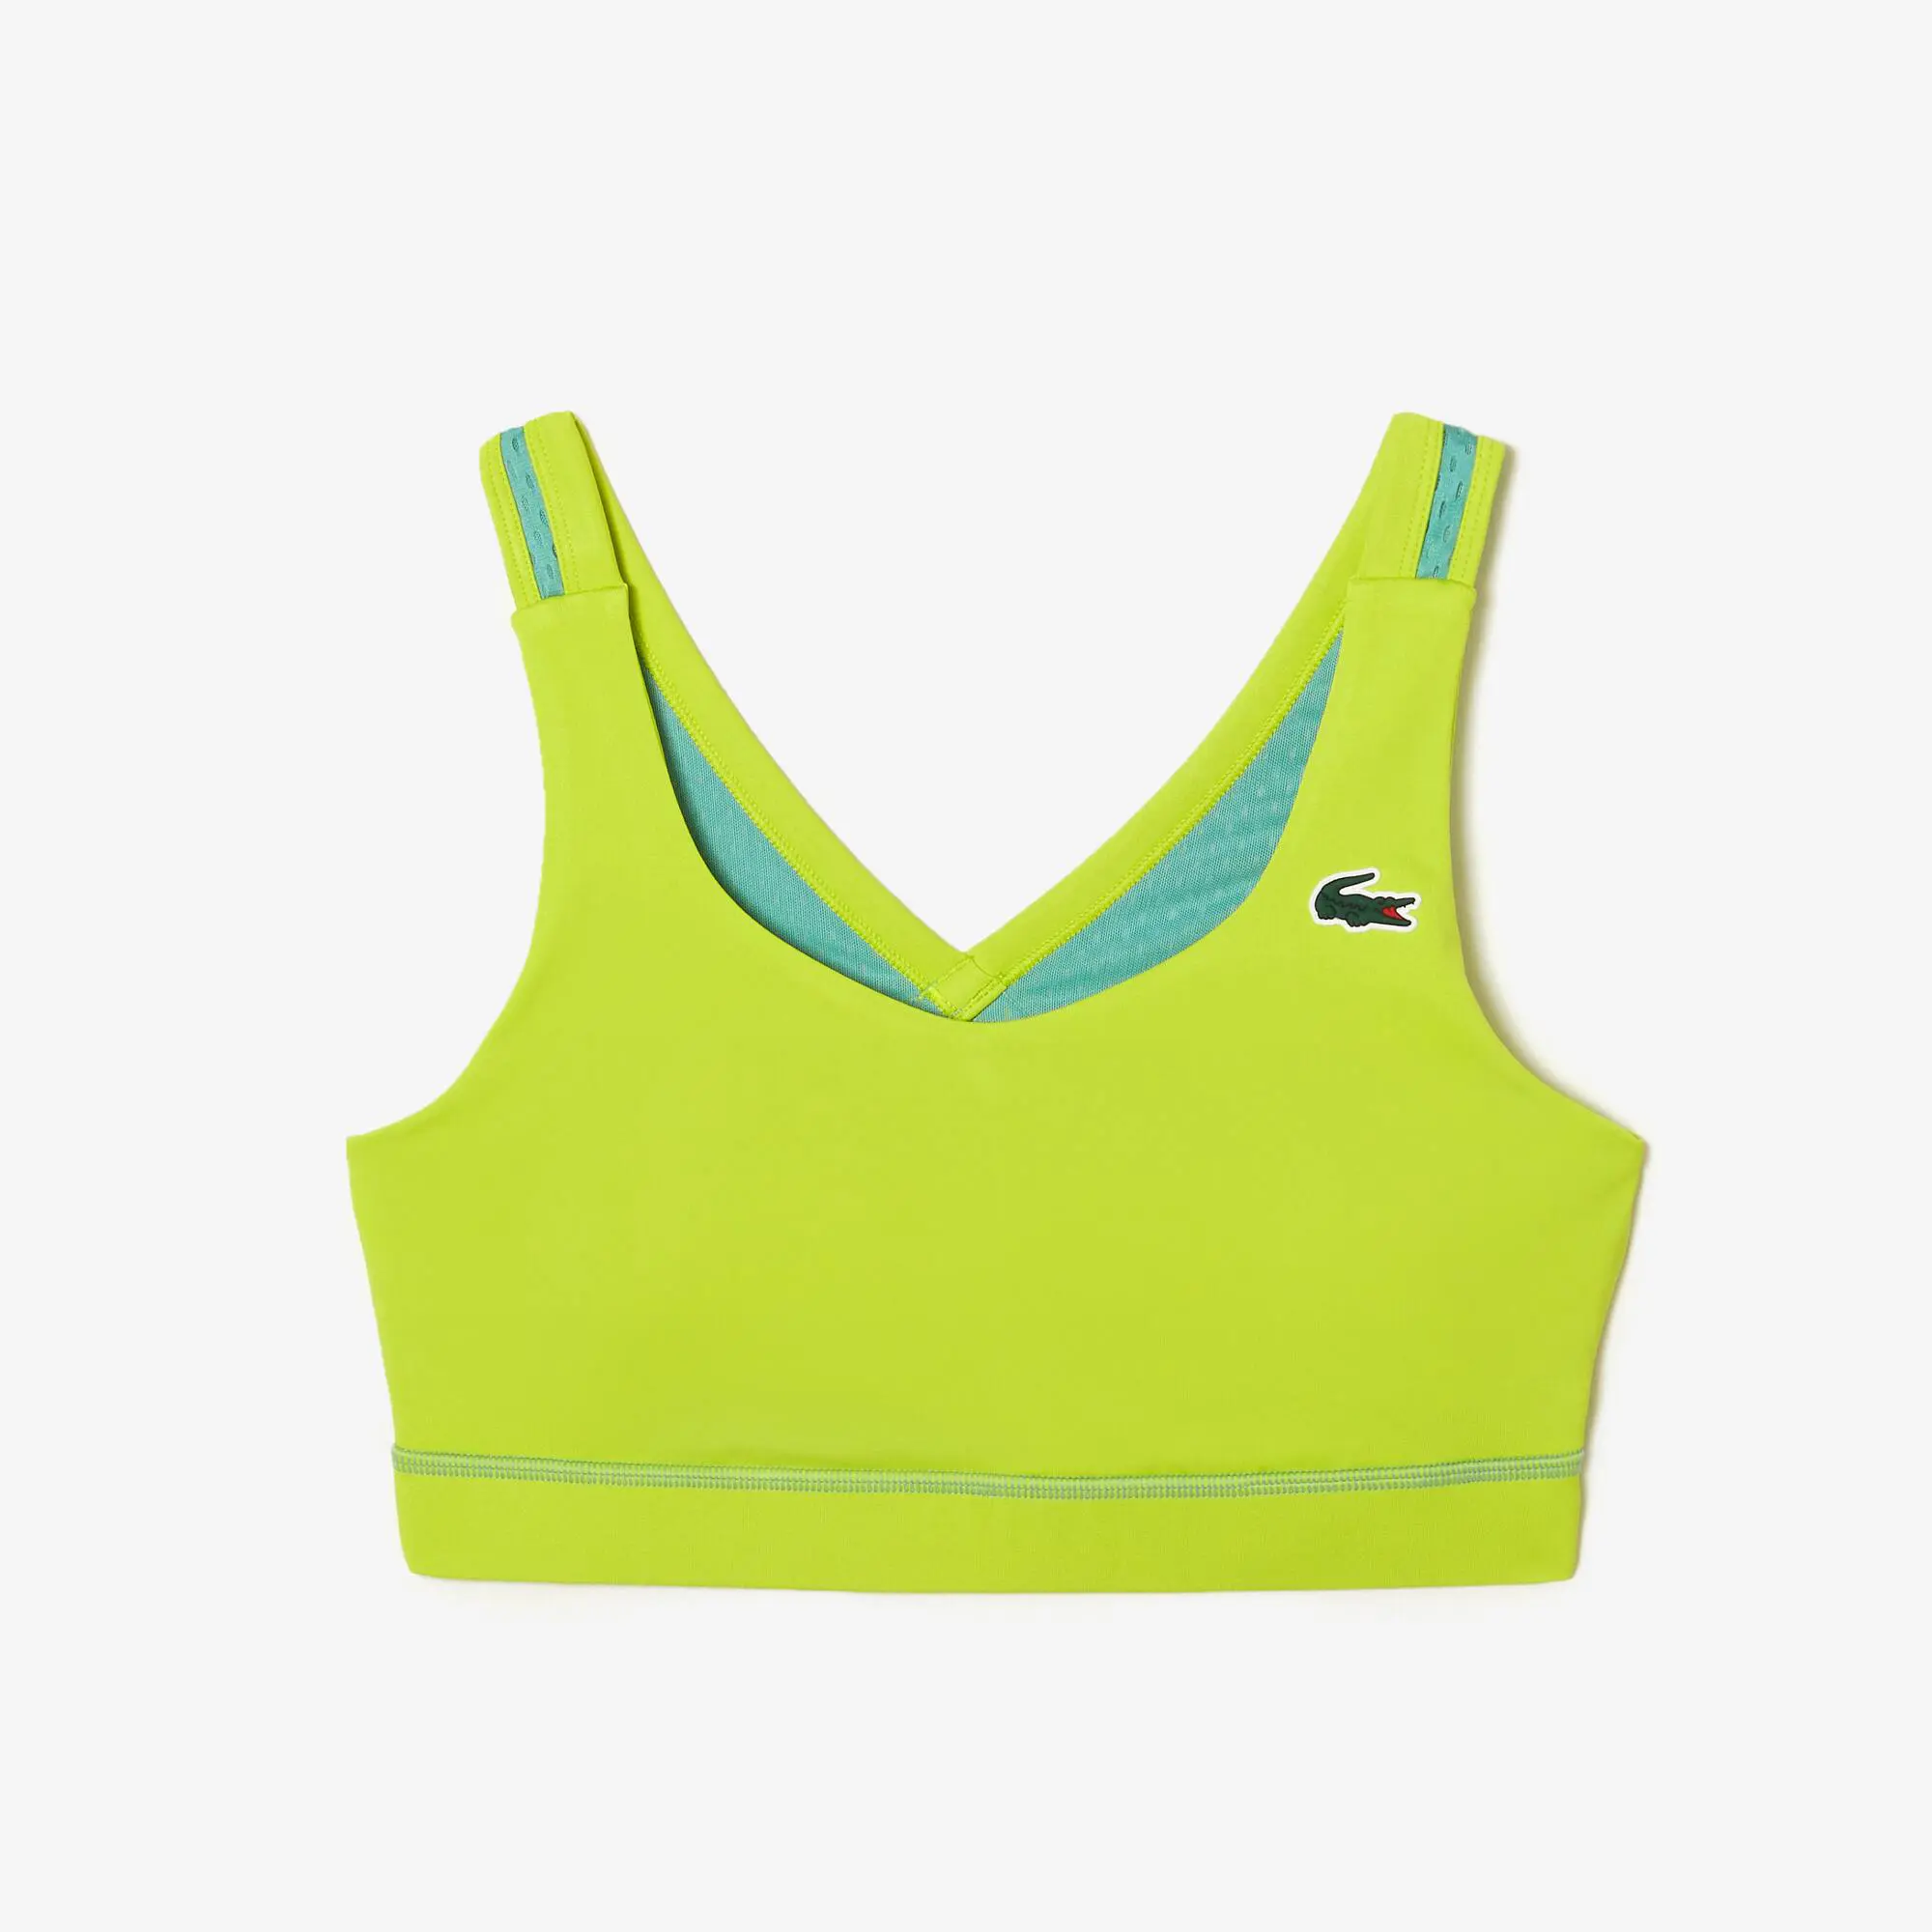 Lacoste Women’s Lacoste Sport Ultra-Dry Recycled Polyester Sports Bra. 2